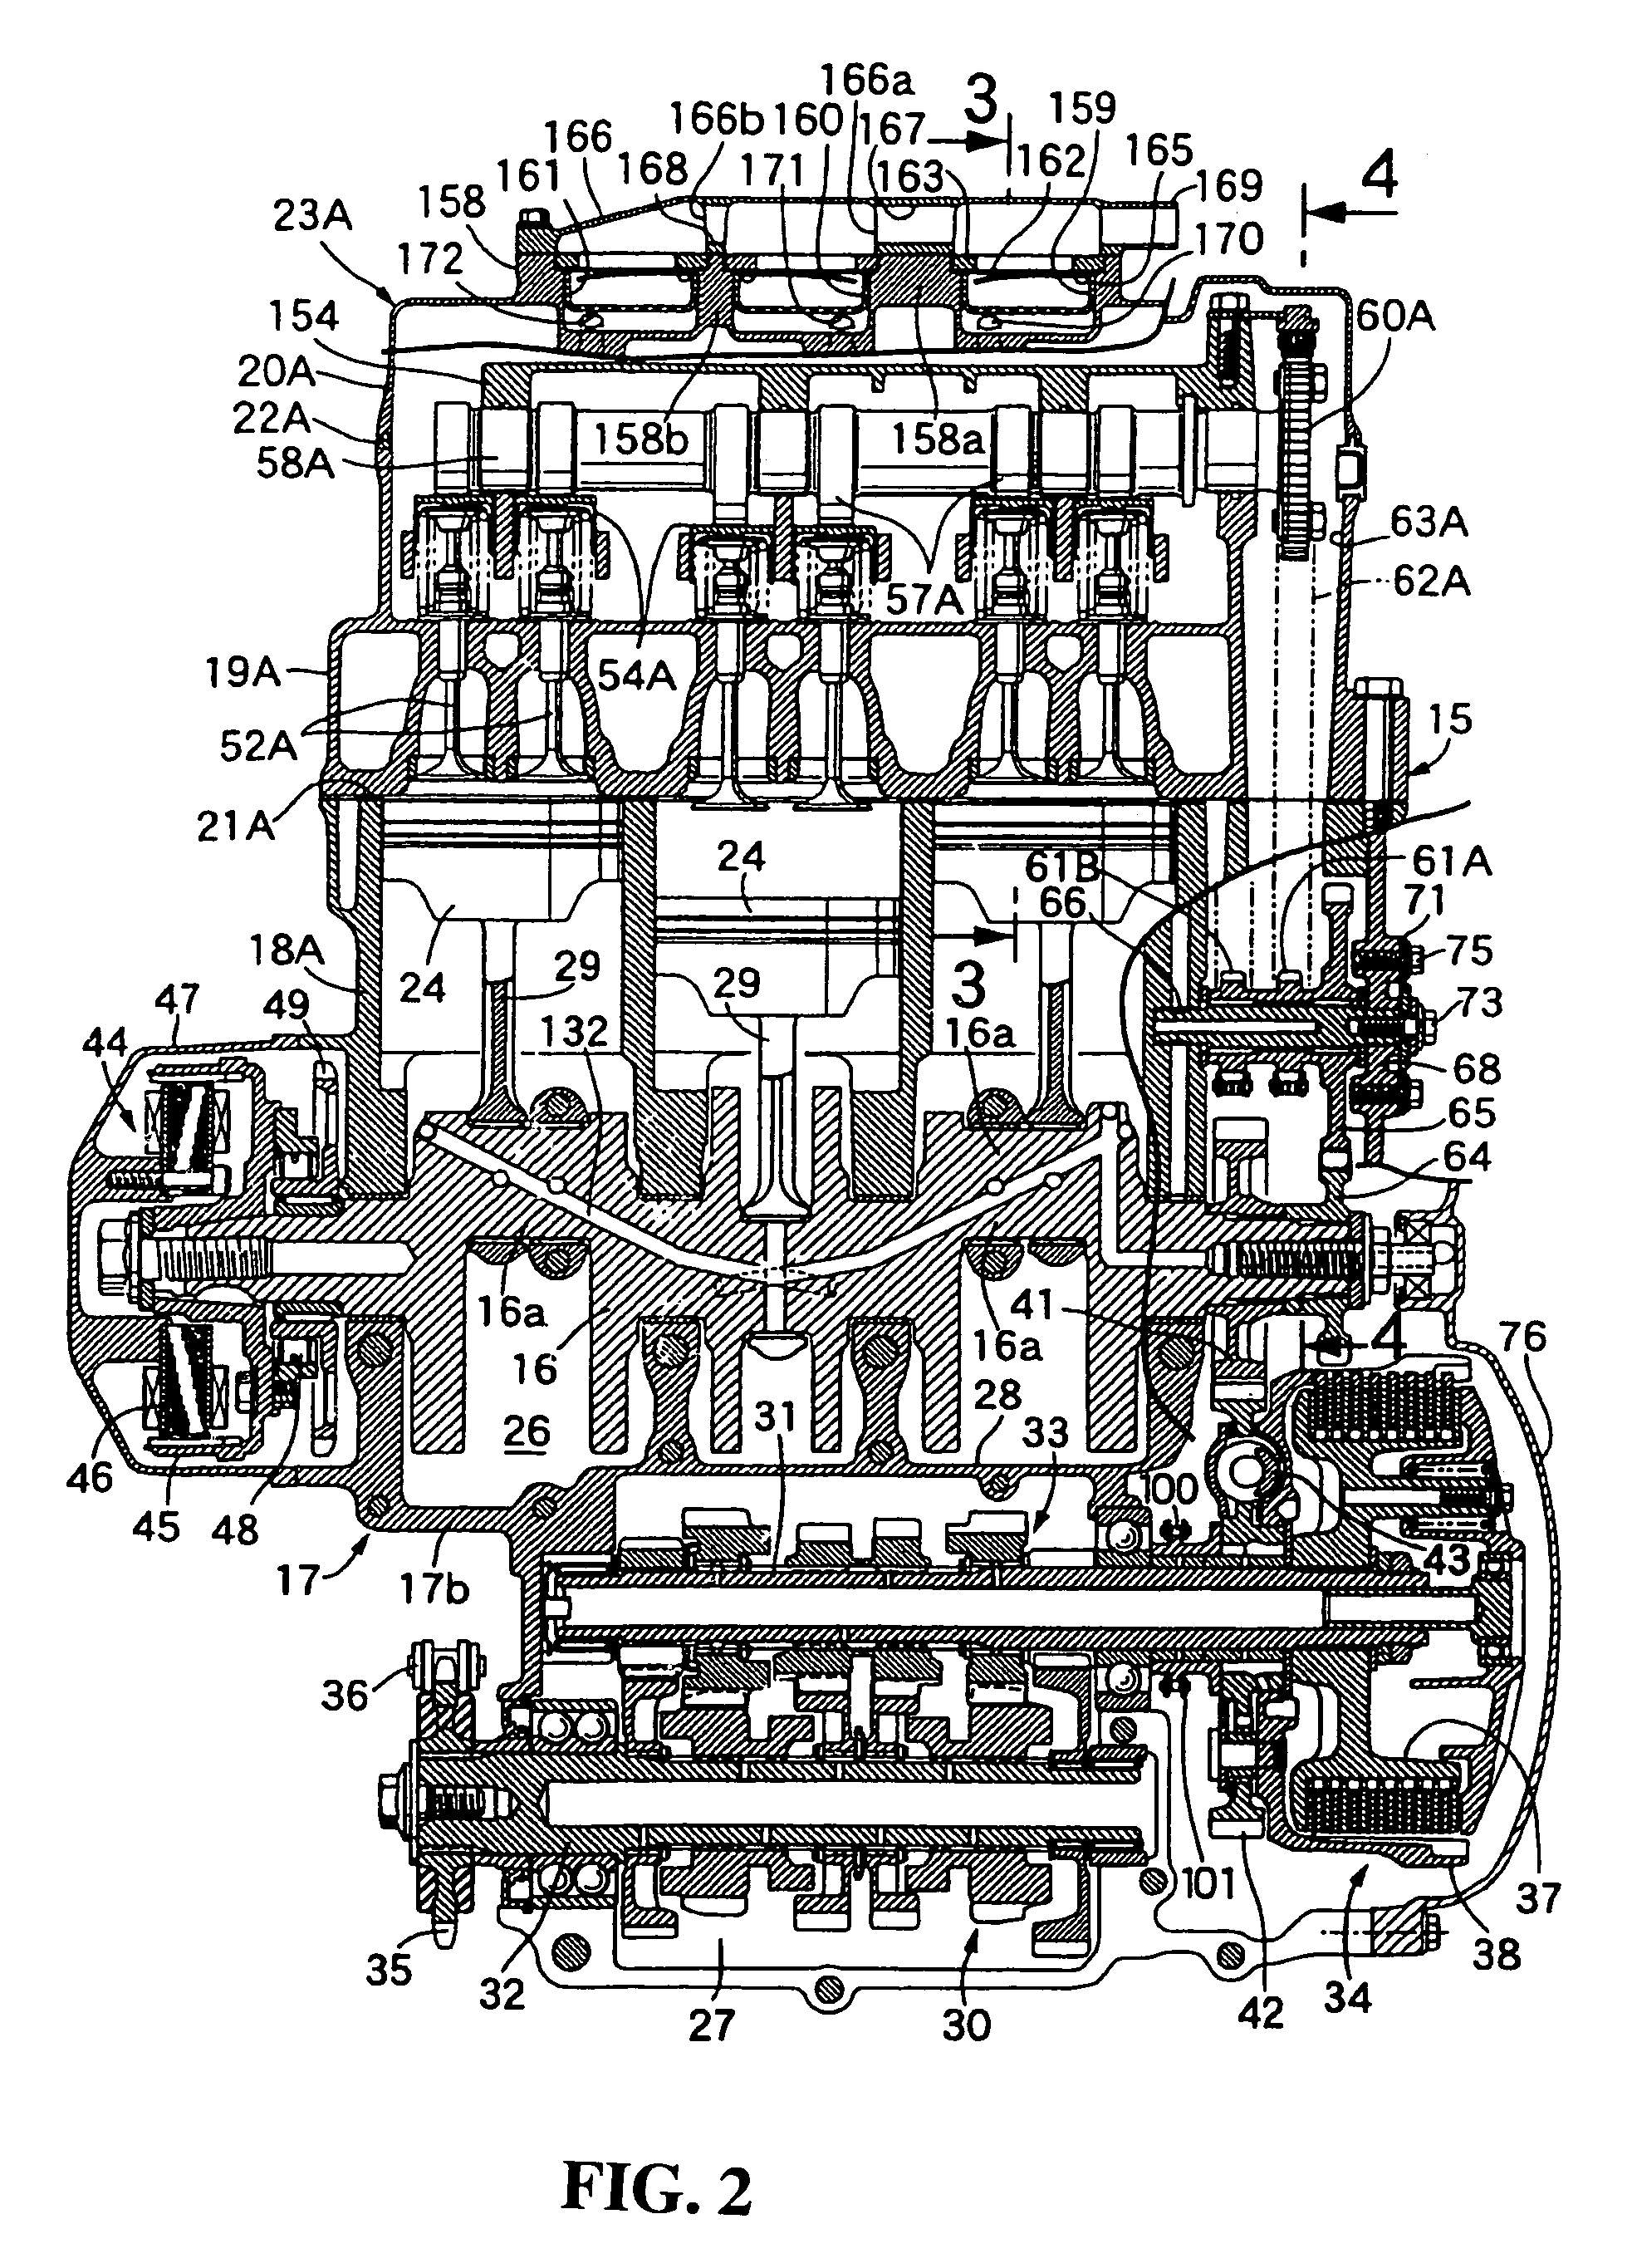 Oil strainer support structure in engine